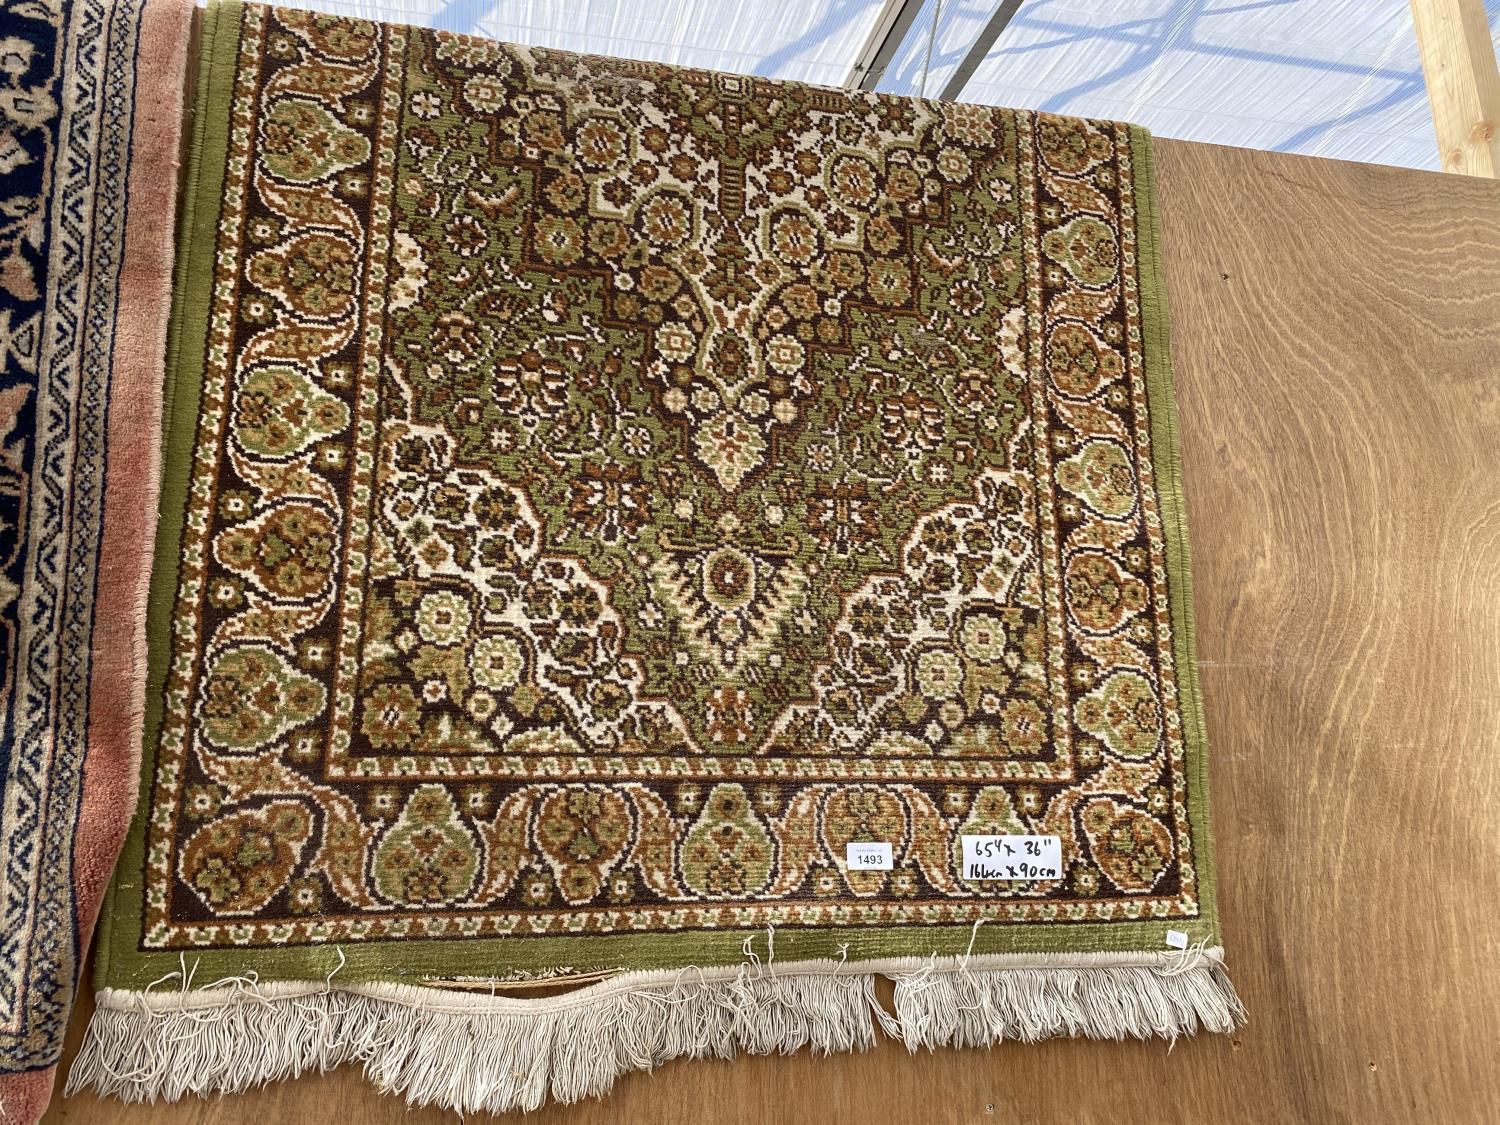 A GREEN PATTERNED RUG